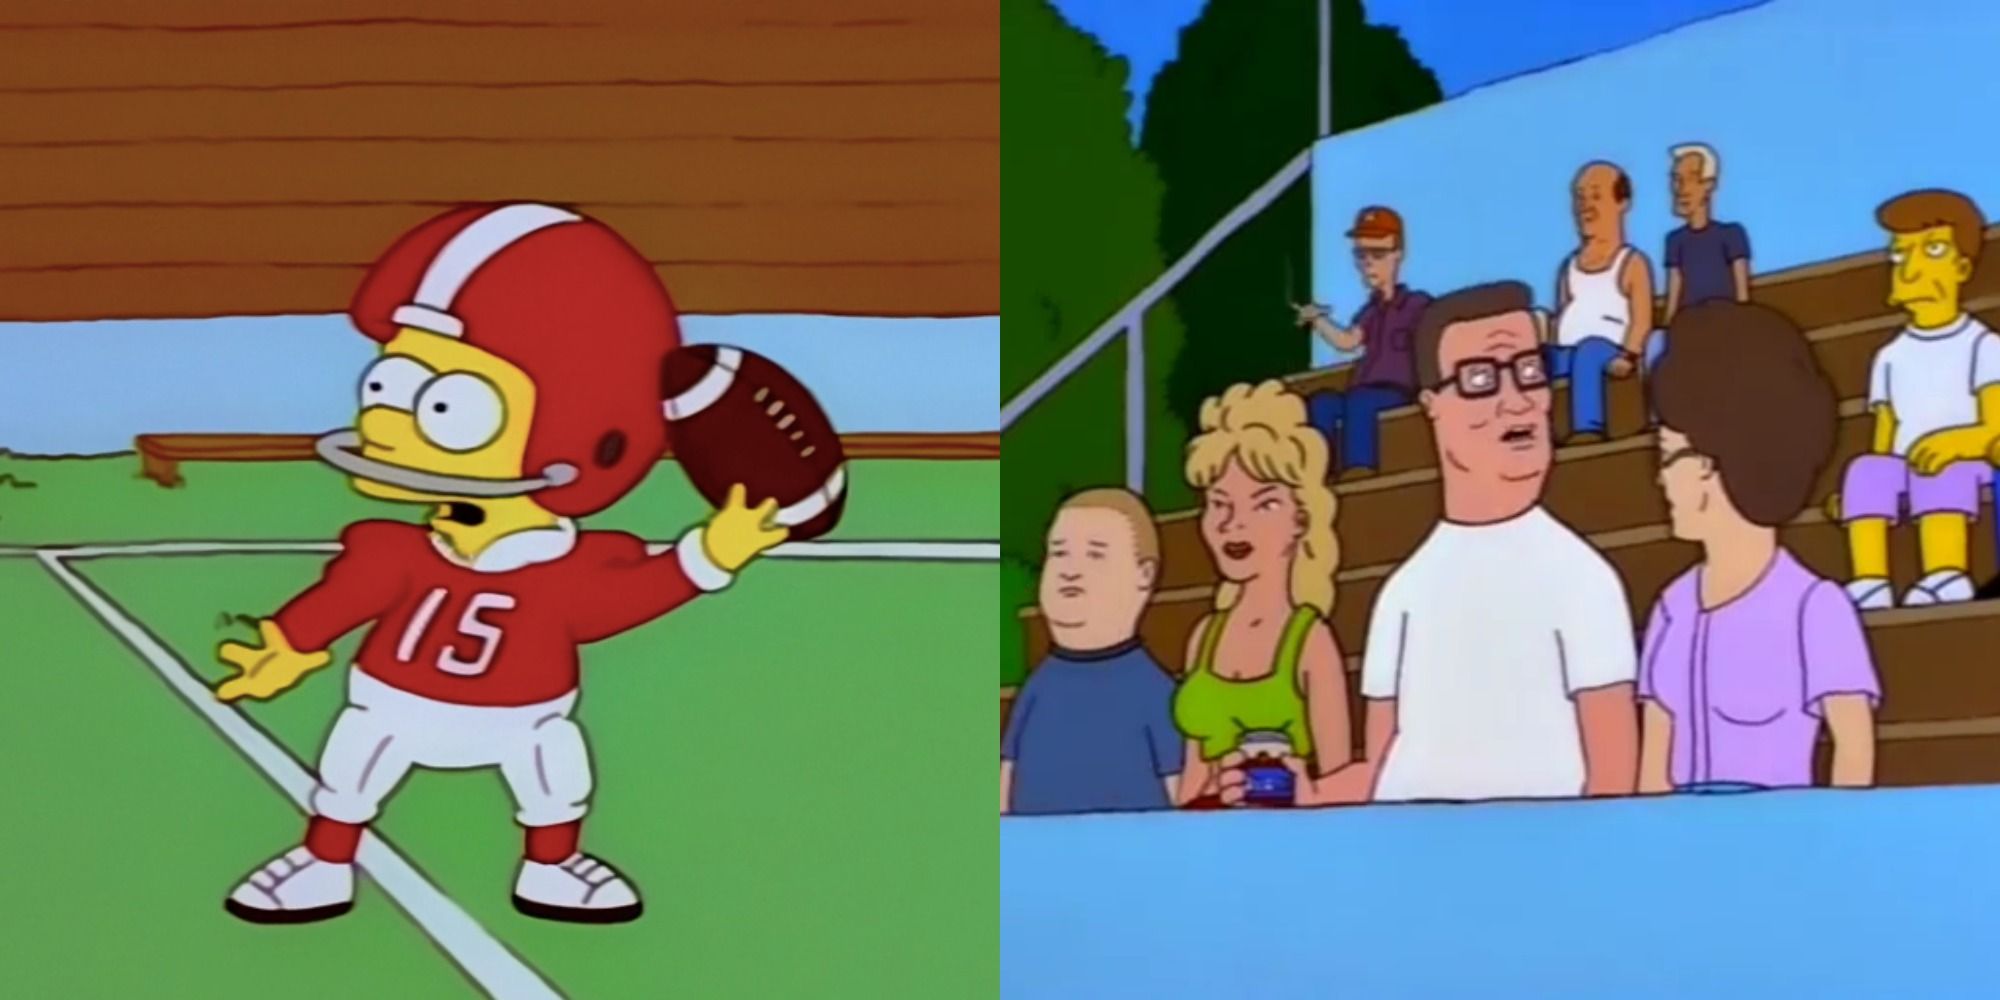 Hank Hill watching a football game on The Simpsons